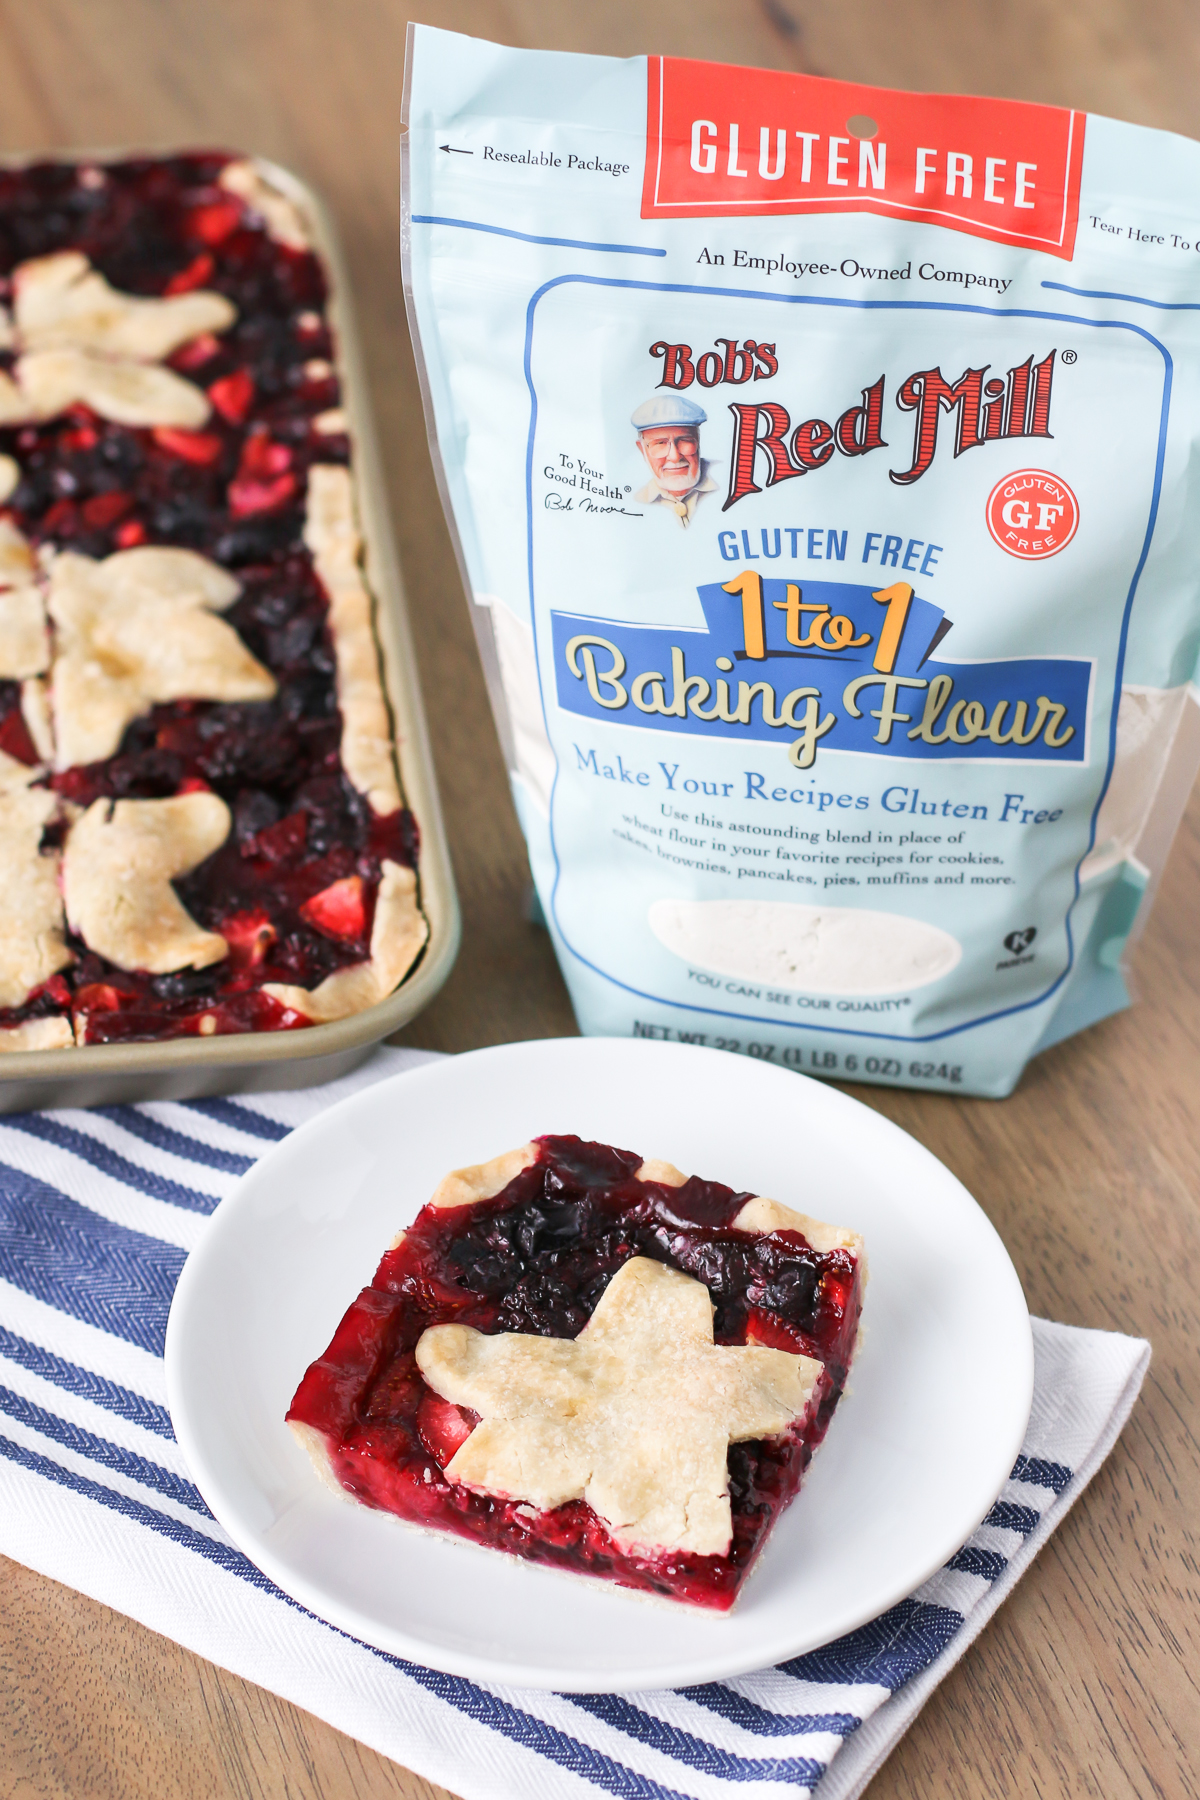 Gluten Free Vegan Triple Berry Slab Pie. Flaky crust, made with Bob’s Red Mill gluten free 1-to-1 baking flour, is filled with fresh berries and baked until bubbly perfection.